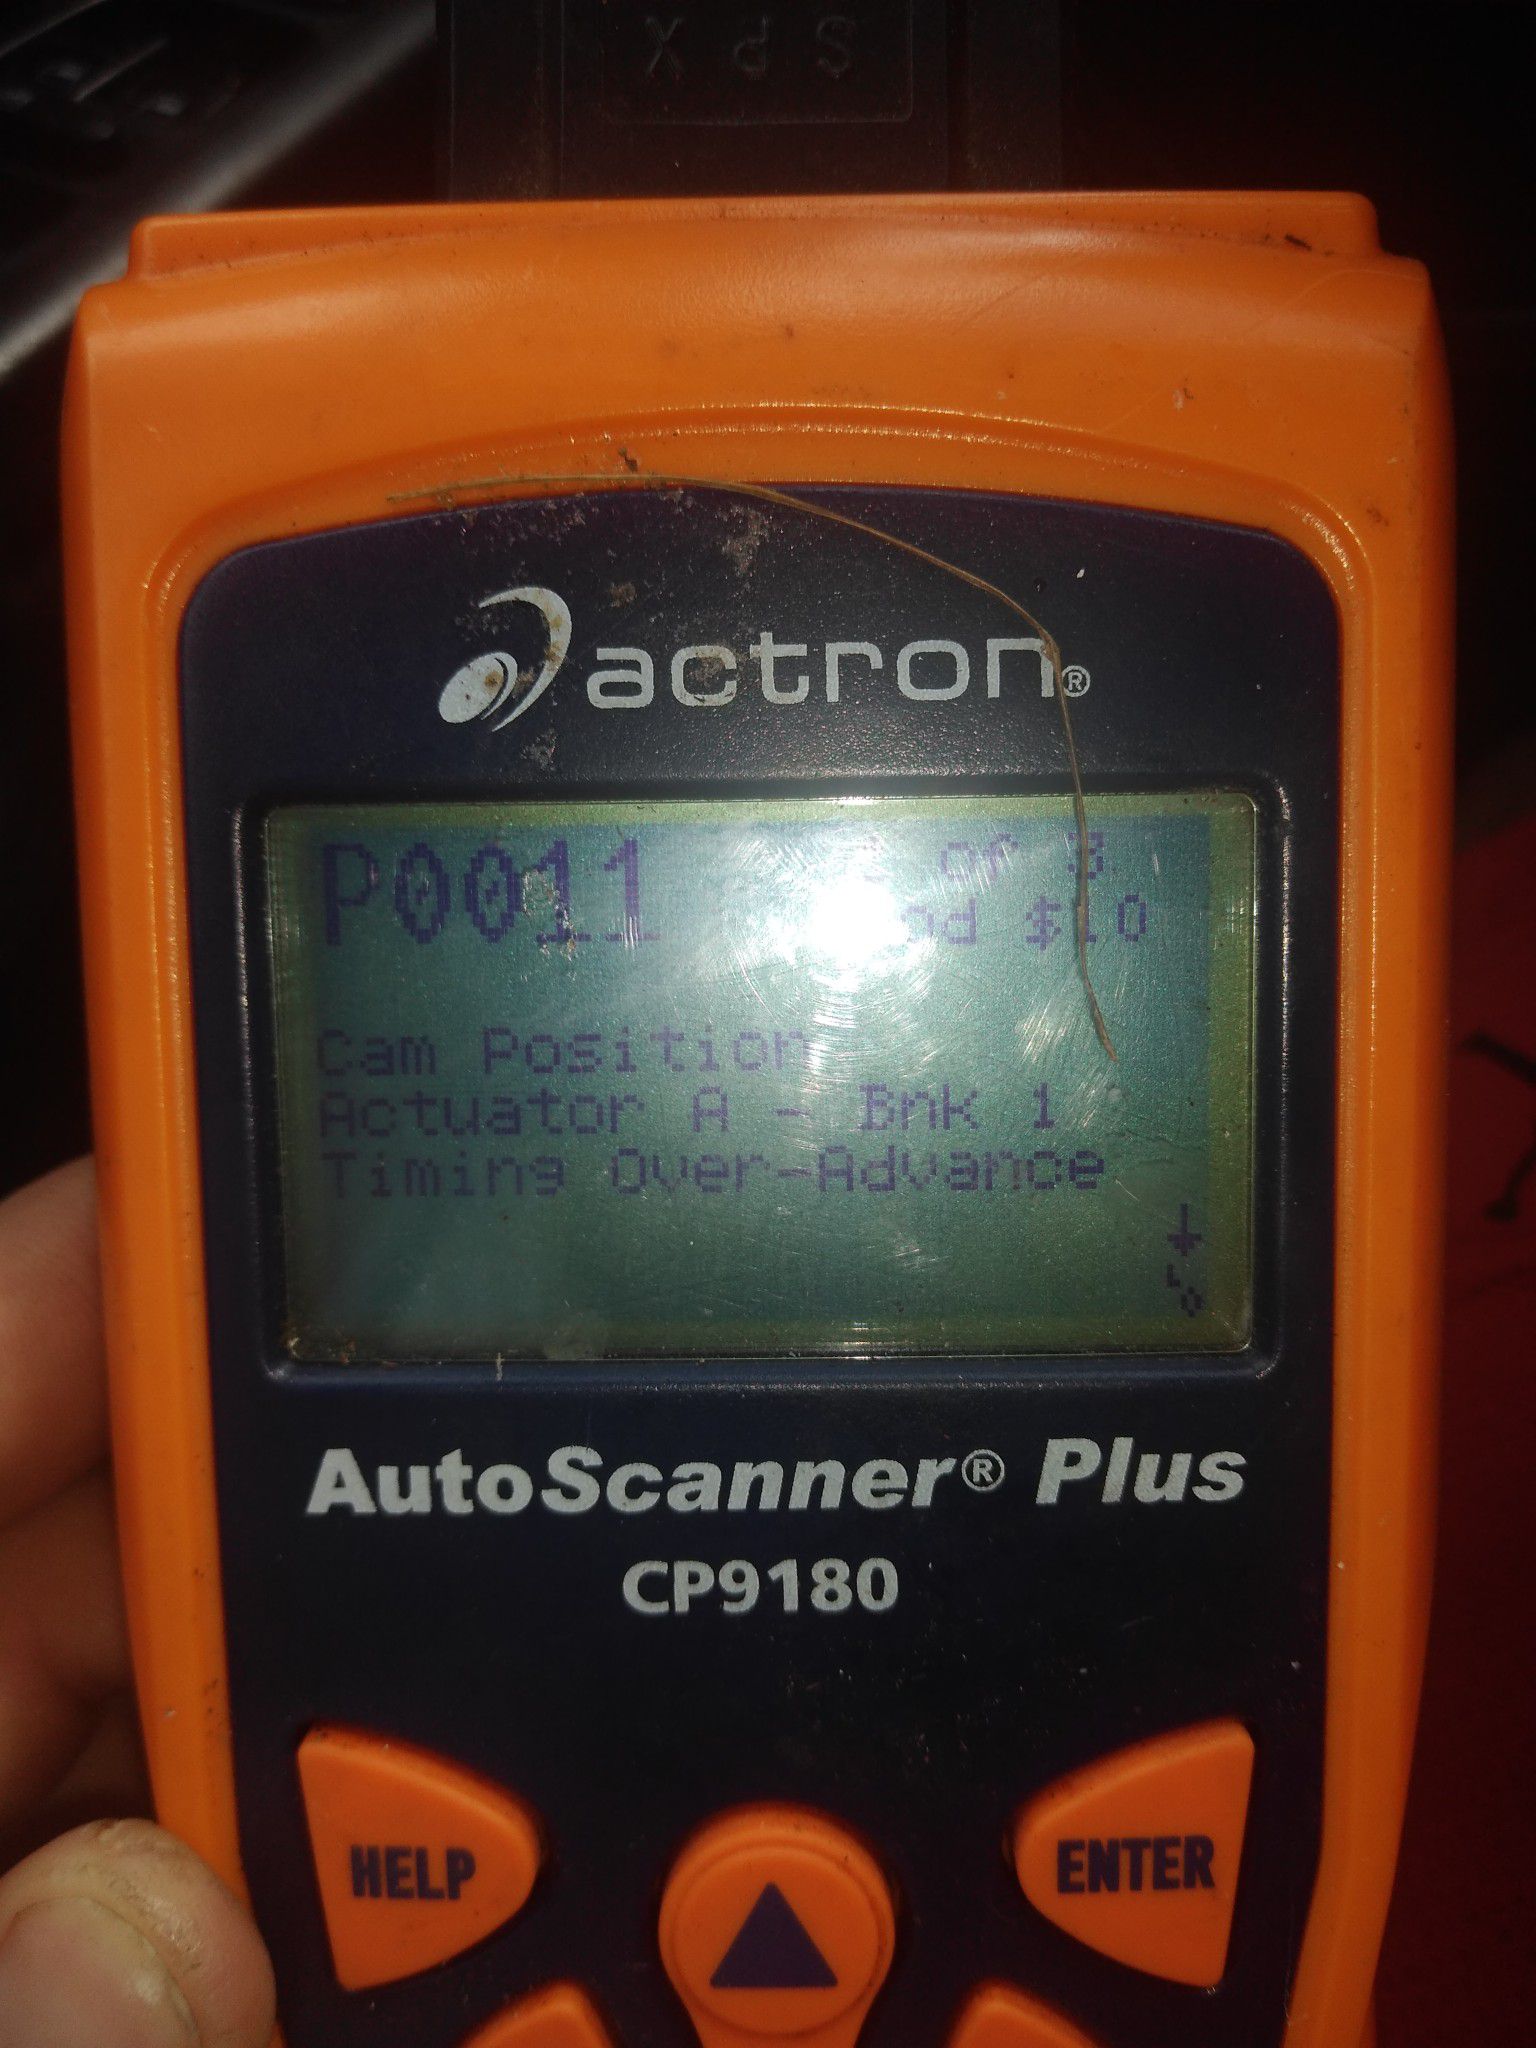 Actron auto scanner plus (check engine light reader)